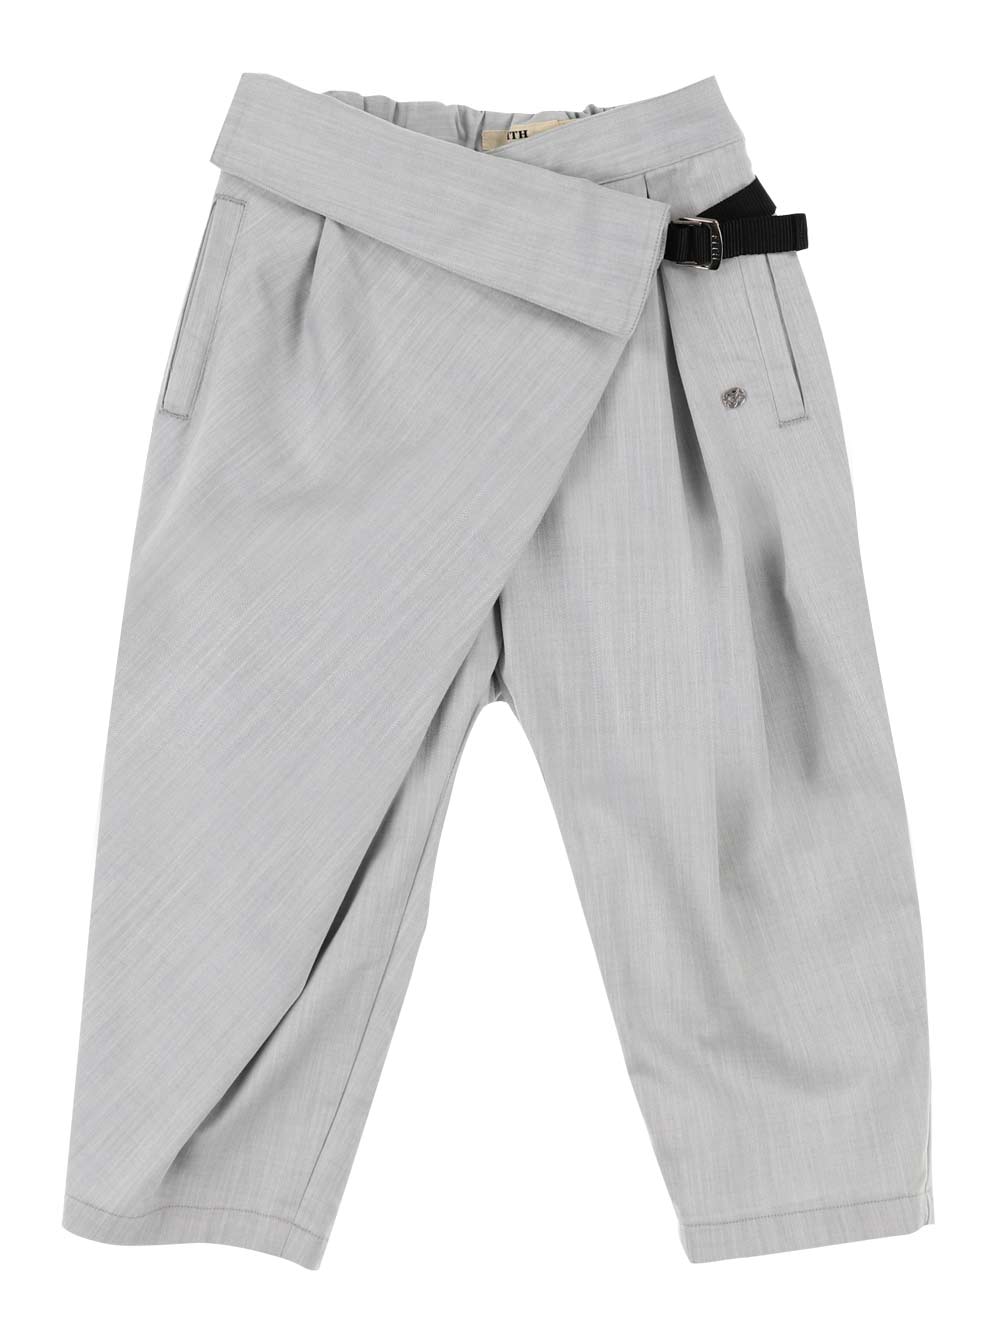 PREORDER: Fith Grey Pants